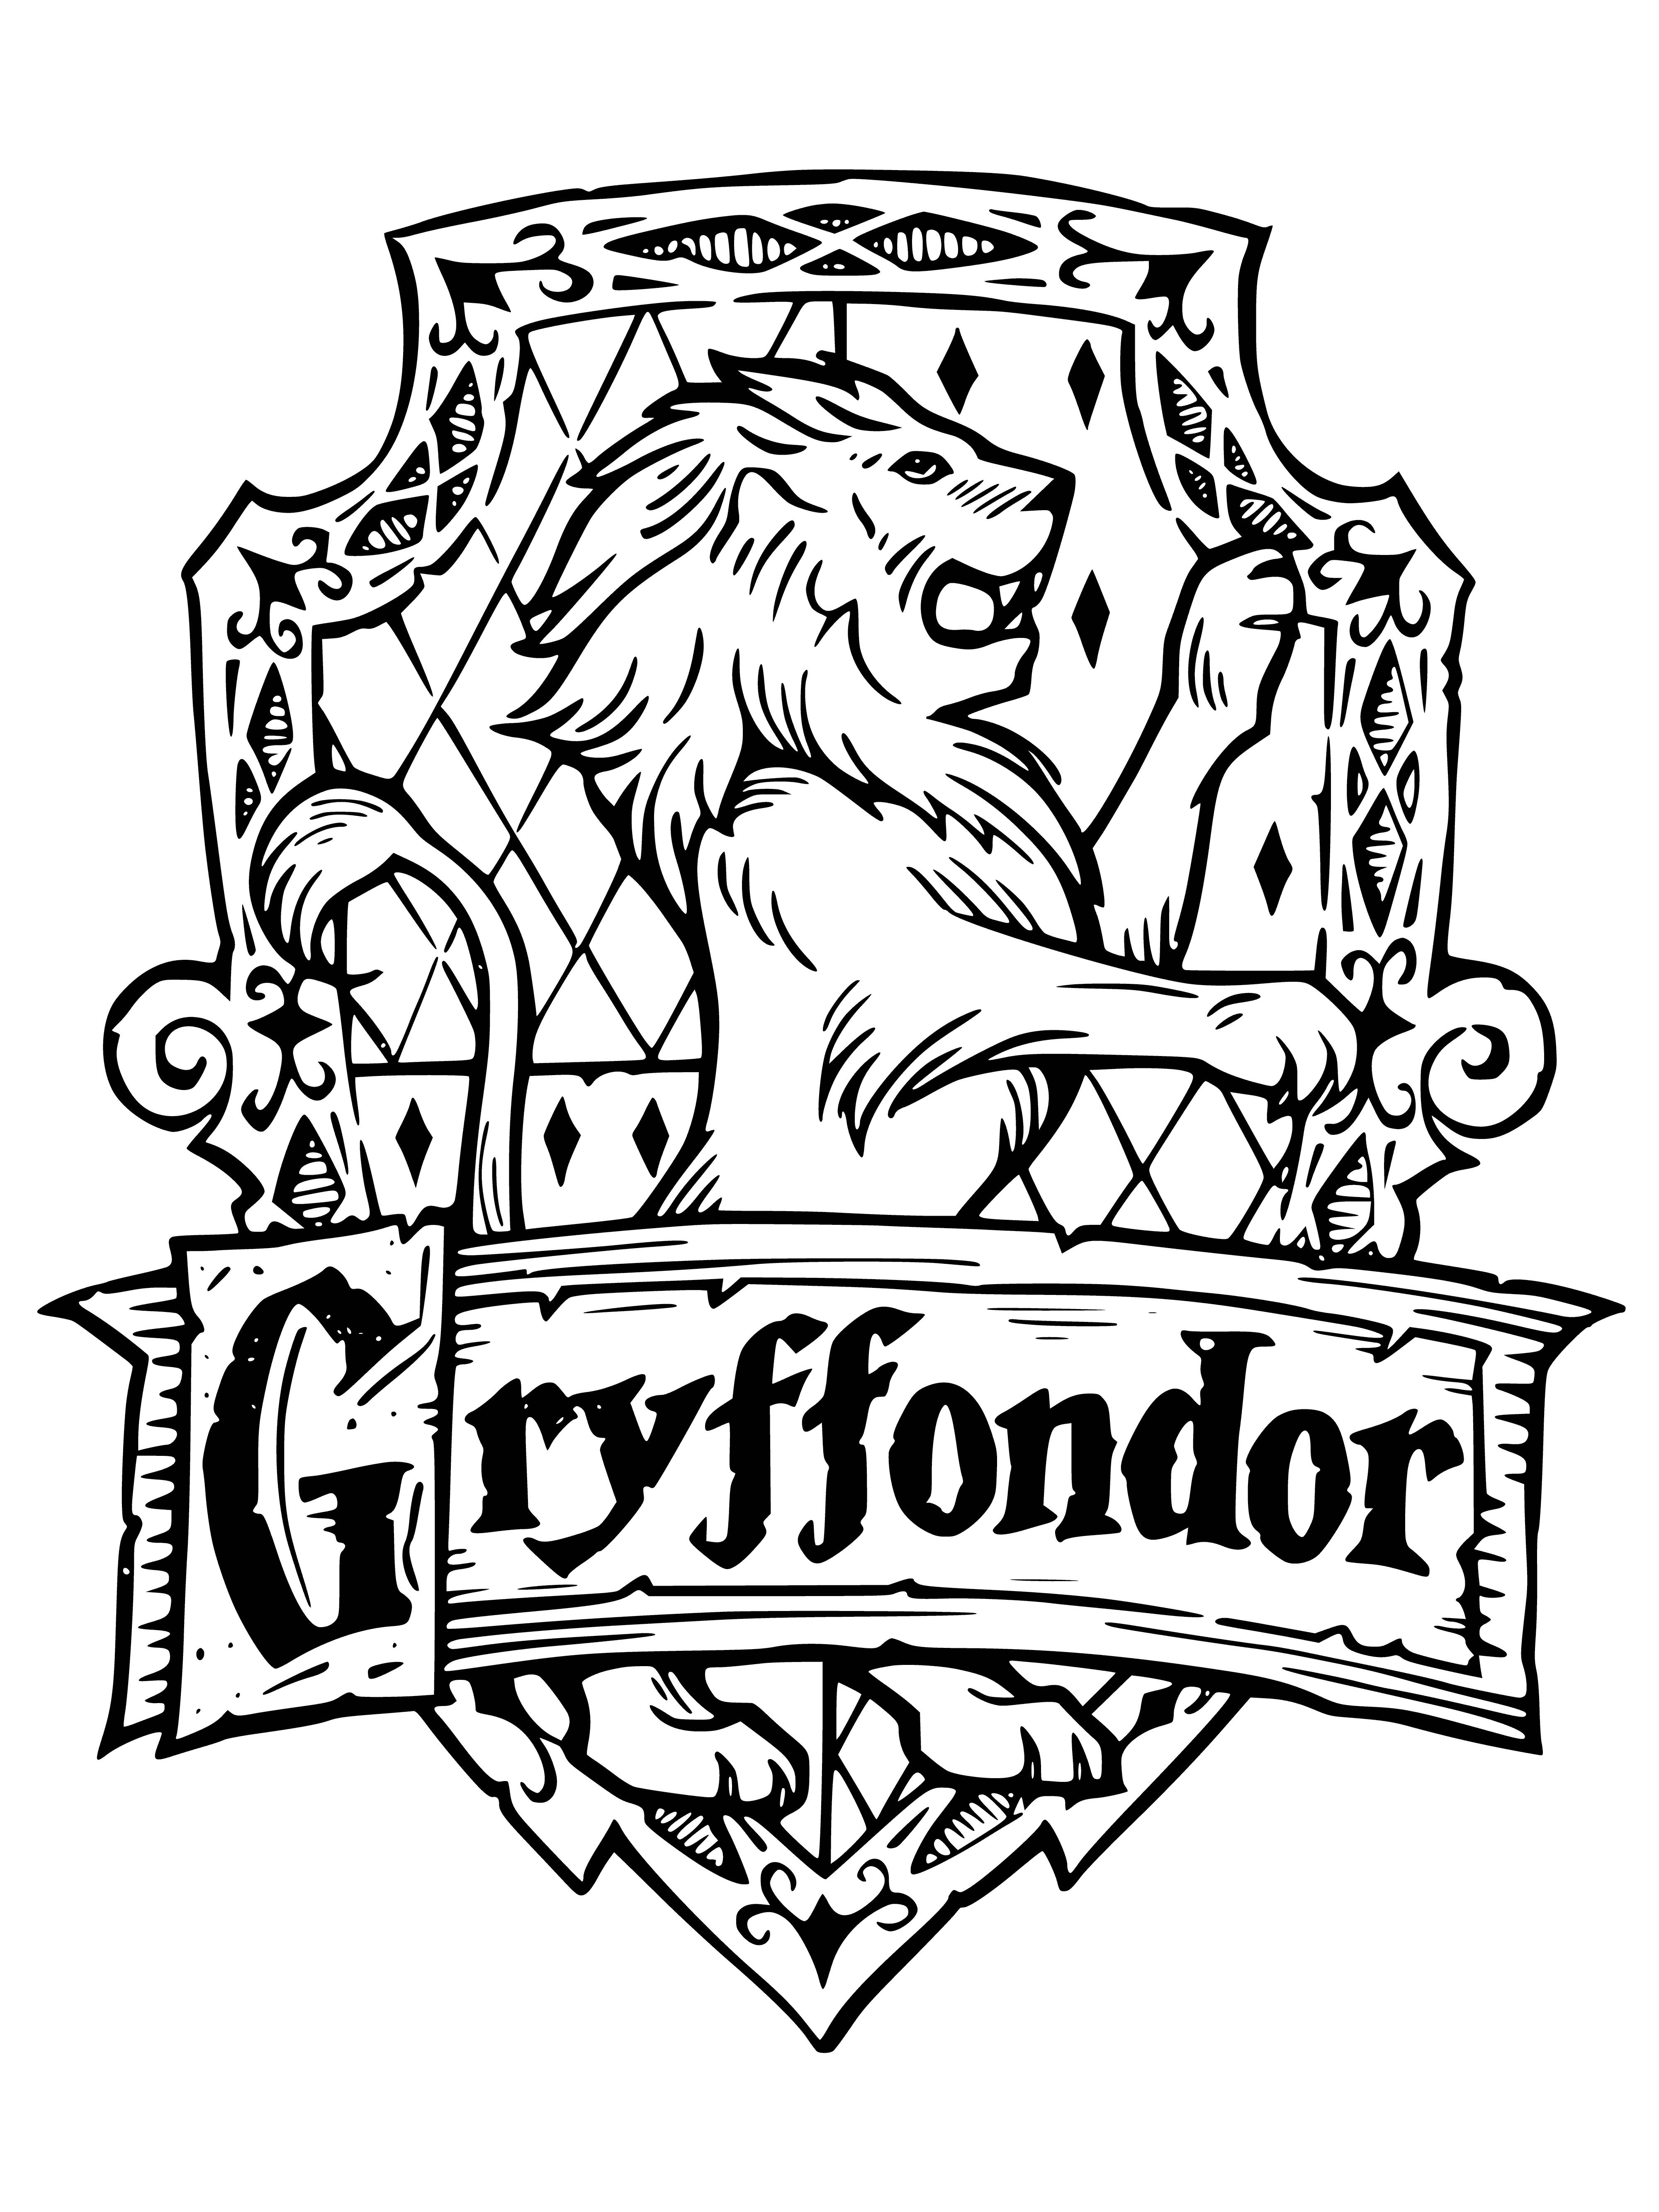 coloring page: Harry Potter's Gryffindor house has a gold lion with a red mane and a silver sword with a gold handle on their coat of arms.